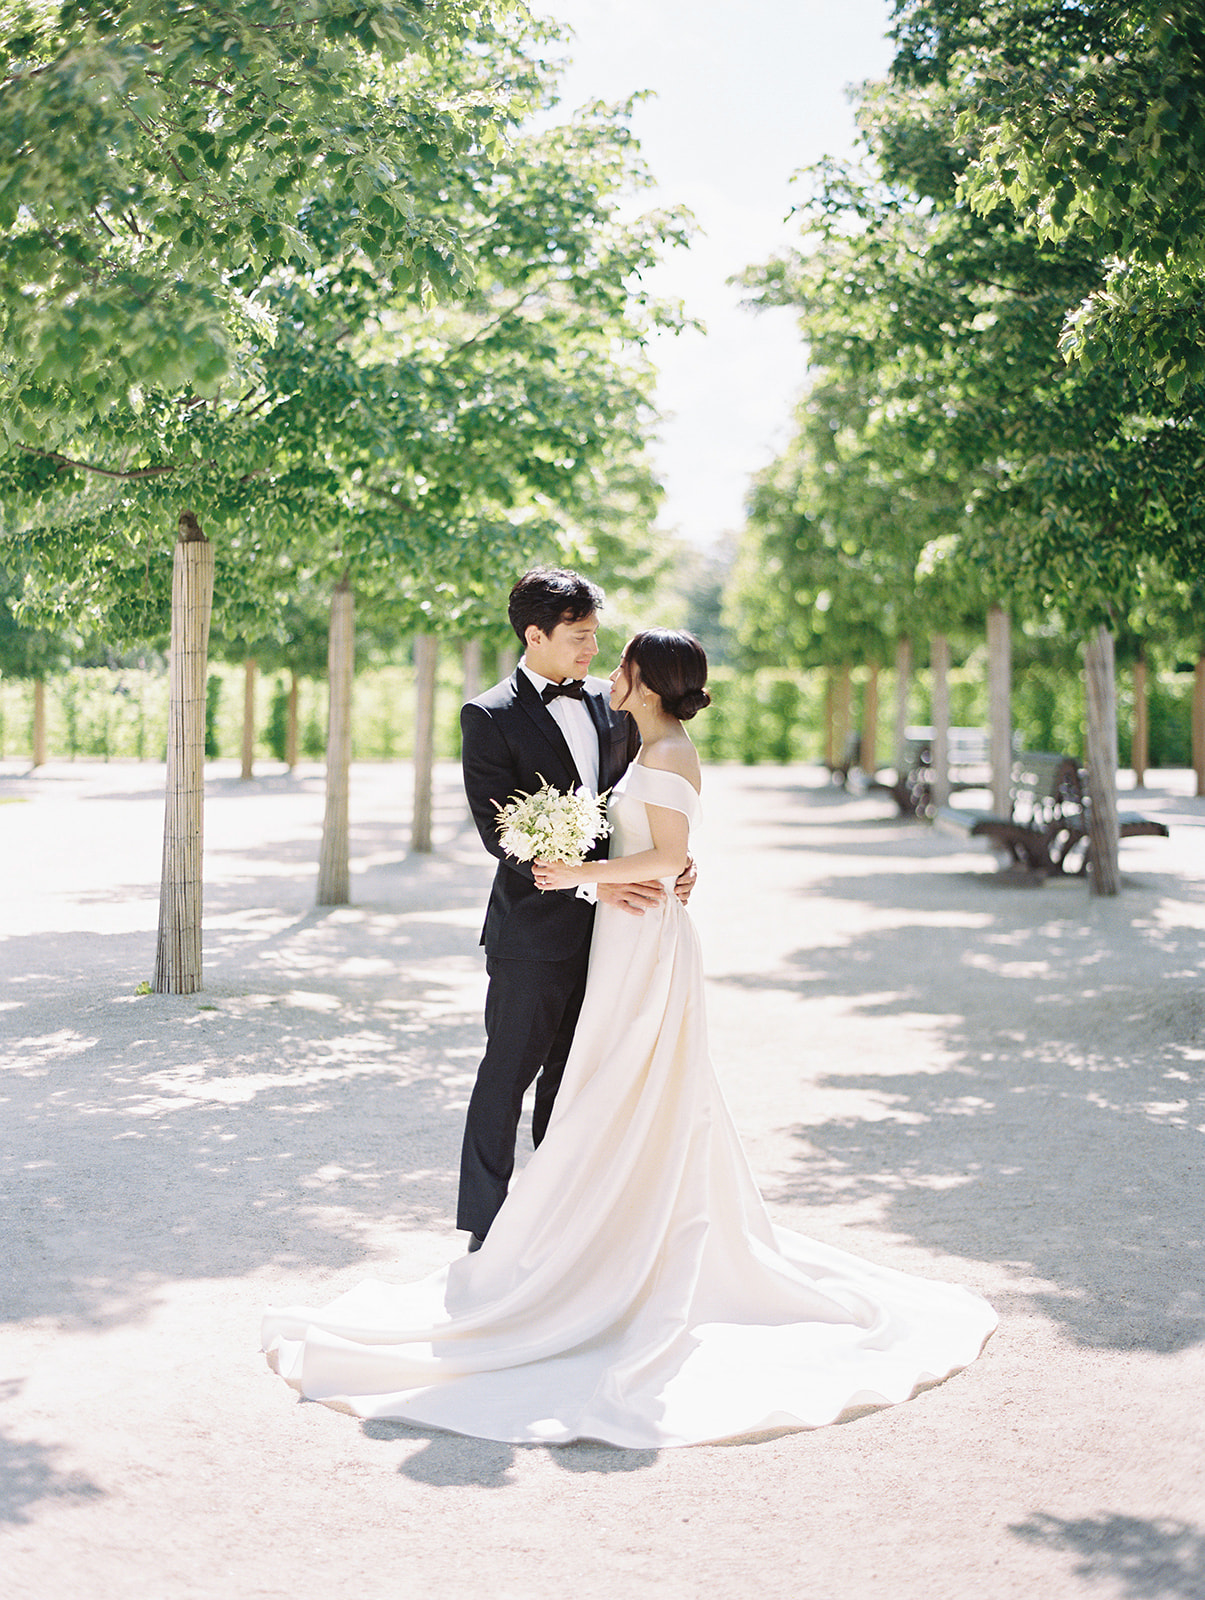 bride and groom embrace on sunny wedding day surrounded by trees at Longwood Gardens in Kennet Square PA